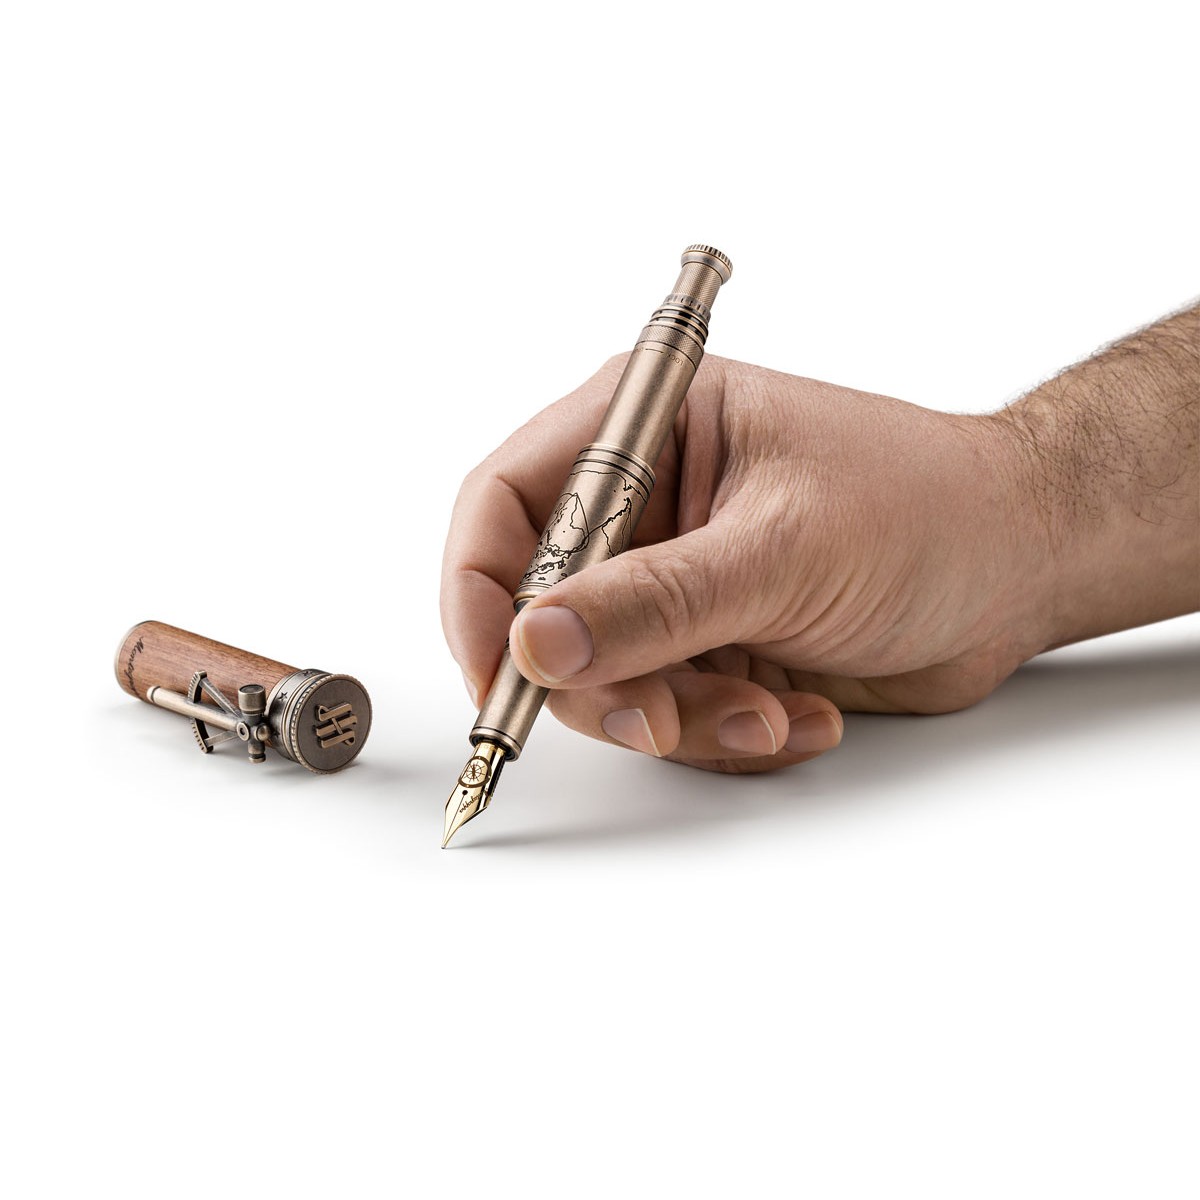 Montegrappa - Age of Discovery - Fountain Pen - Limited Edition